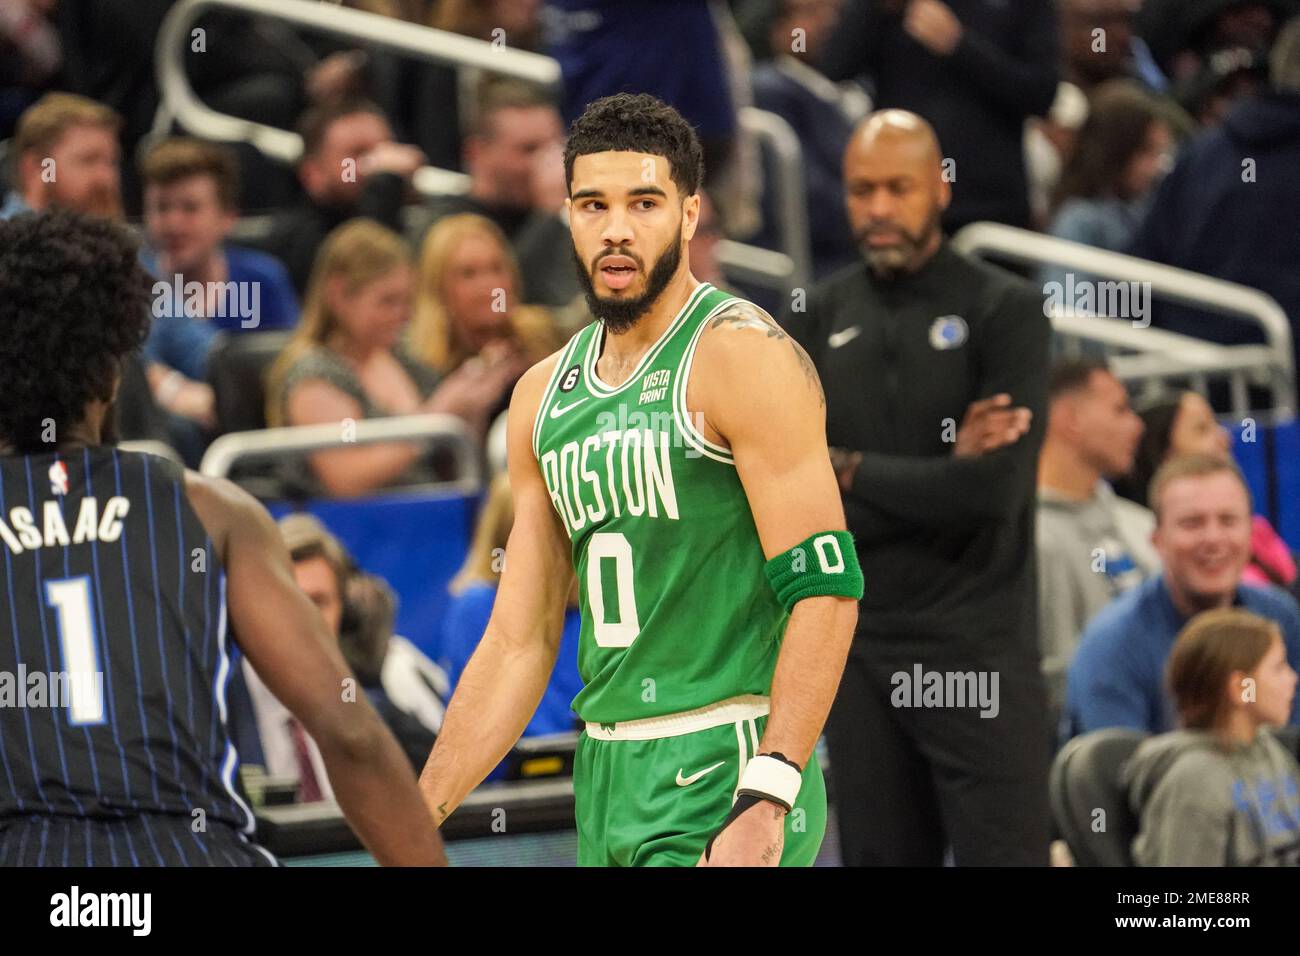 ORLANDO, FLORIDA – JANUARY 23: A detail Jayson Tatum #0 of the Boston  Celtics shoes during a game against the Orlando Magic at Amway Center on  January 23, 2023 in Orlando, Florida.